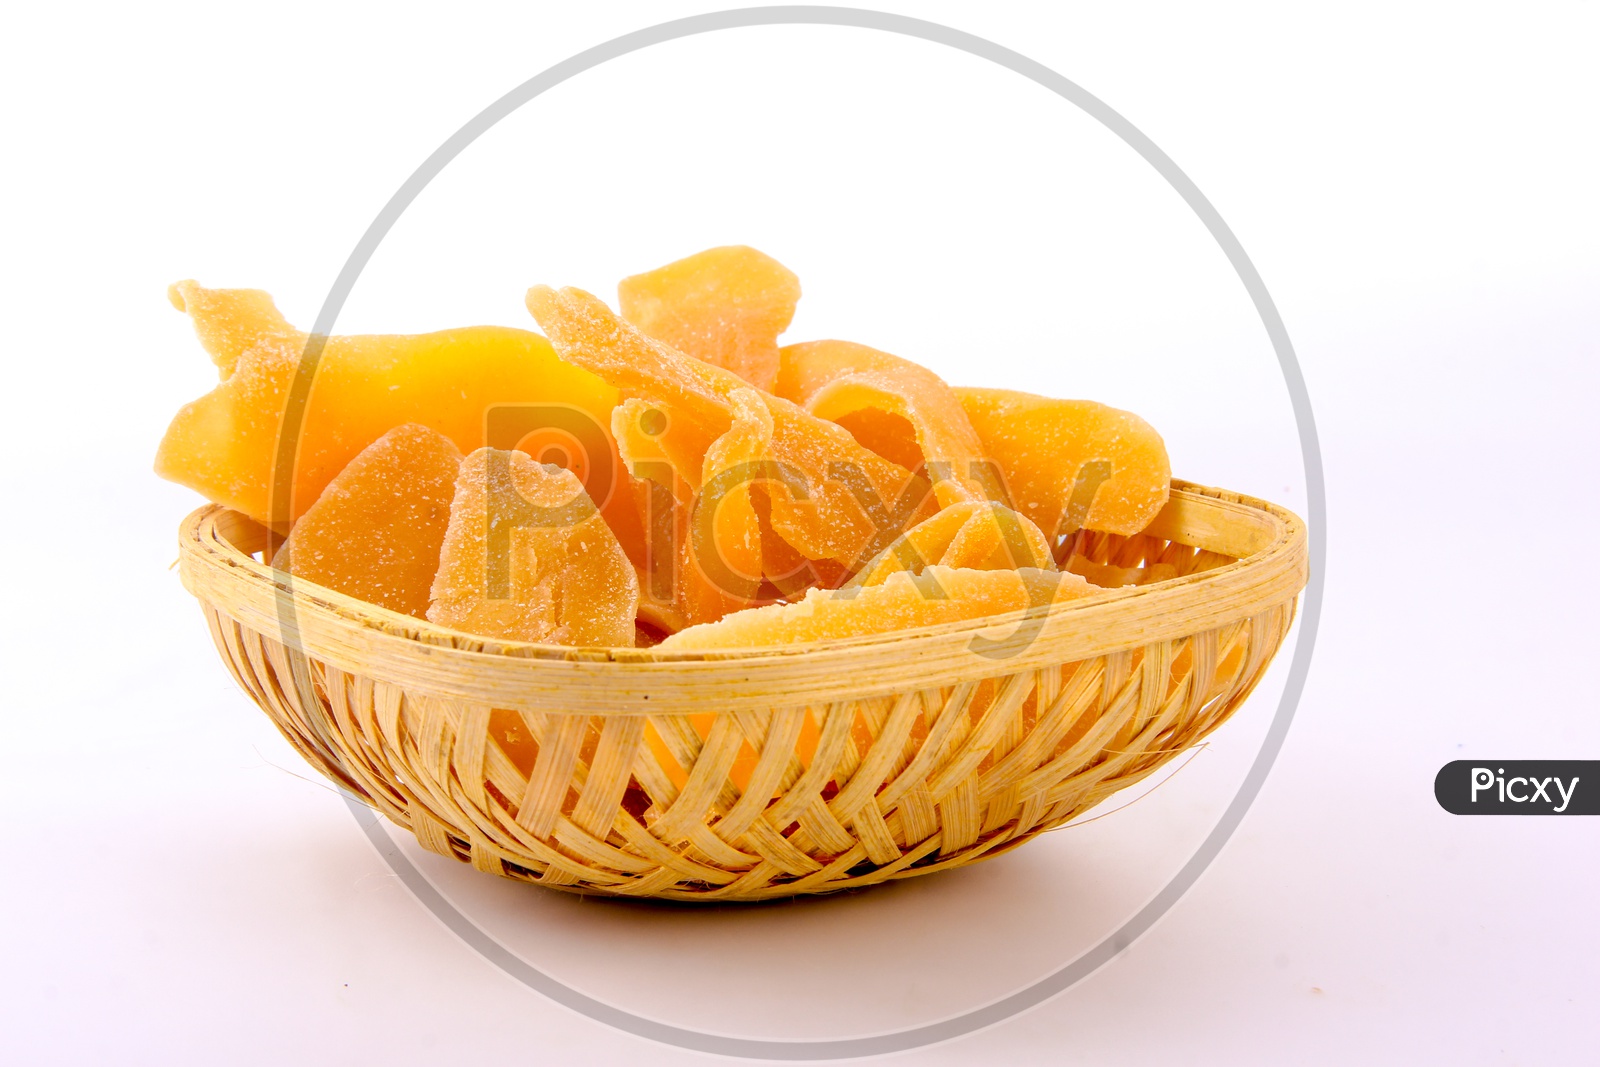 Dried Mango Slices In a Bowl On an Isolated White Back Ground